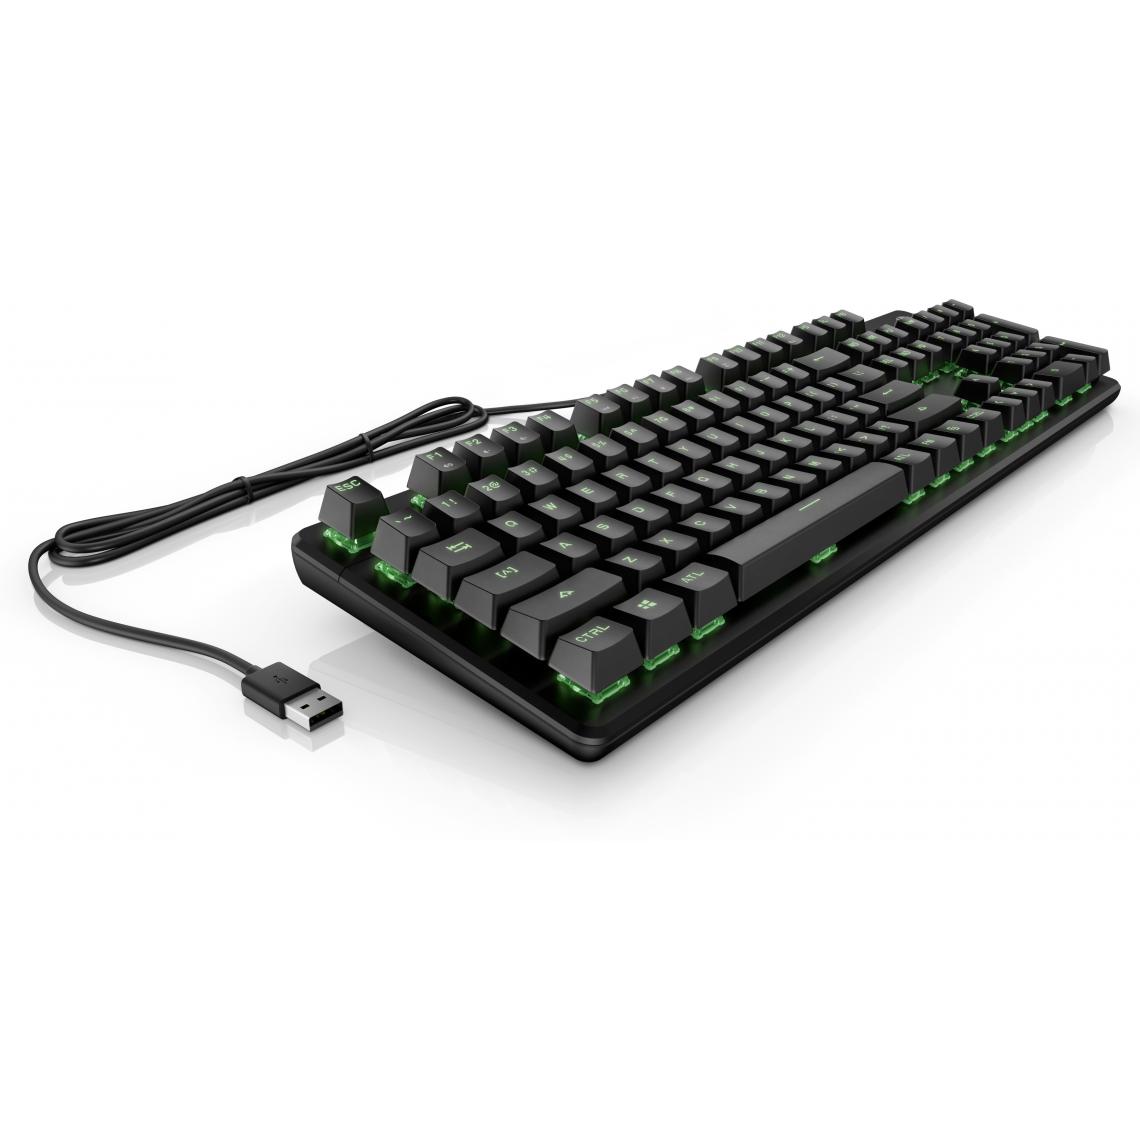 Hp - Pavilion Gaming 550 - Clavier